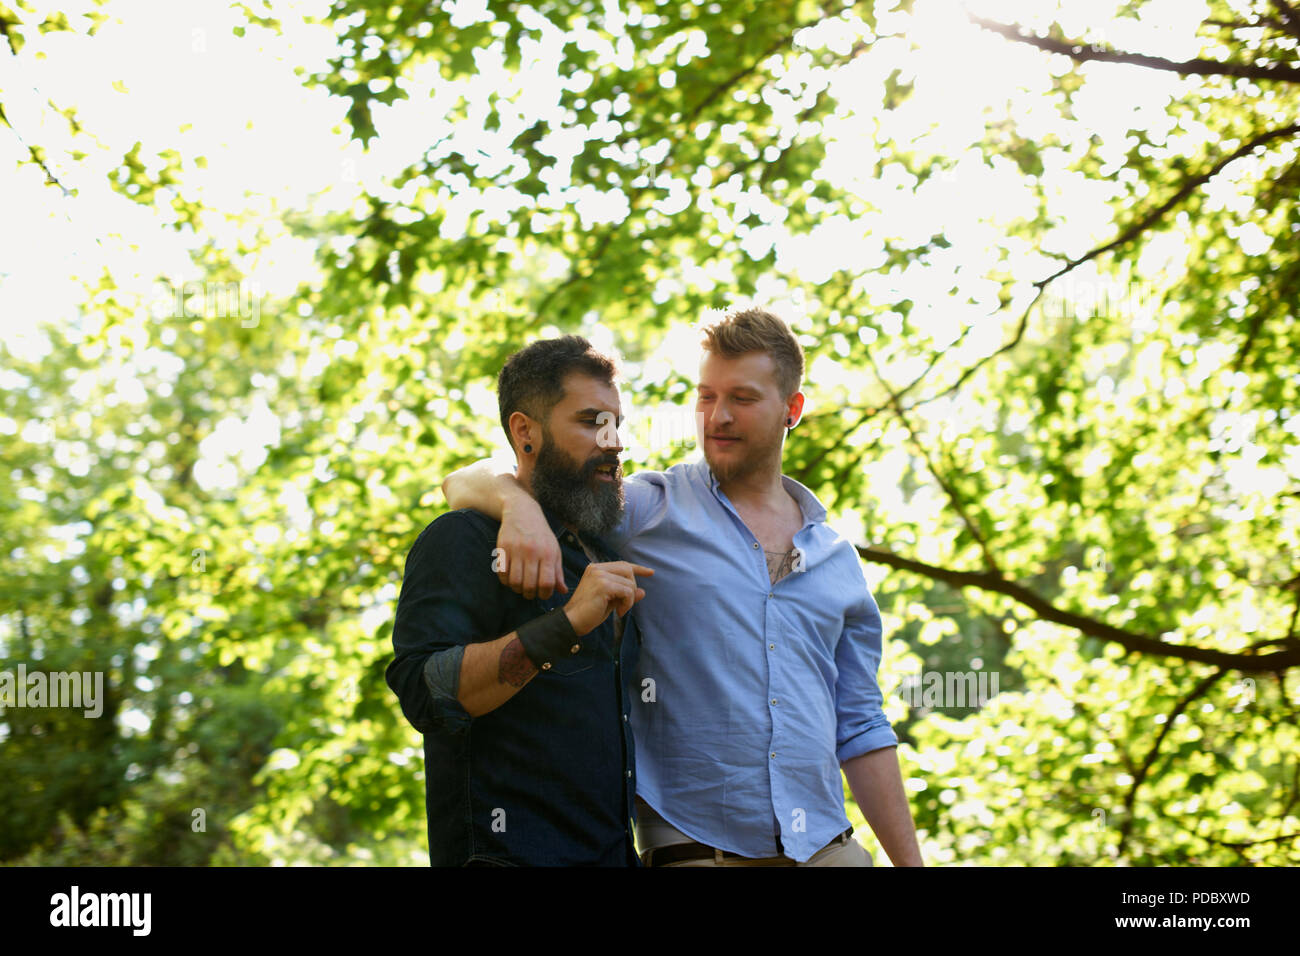 Affectionate male gay couple walking in sunny park Stock Photo